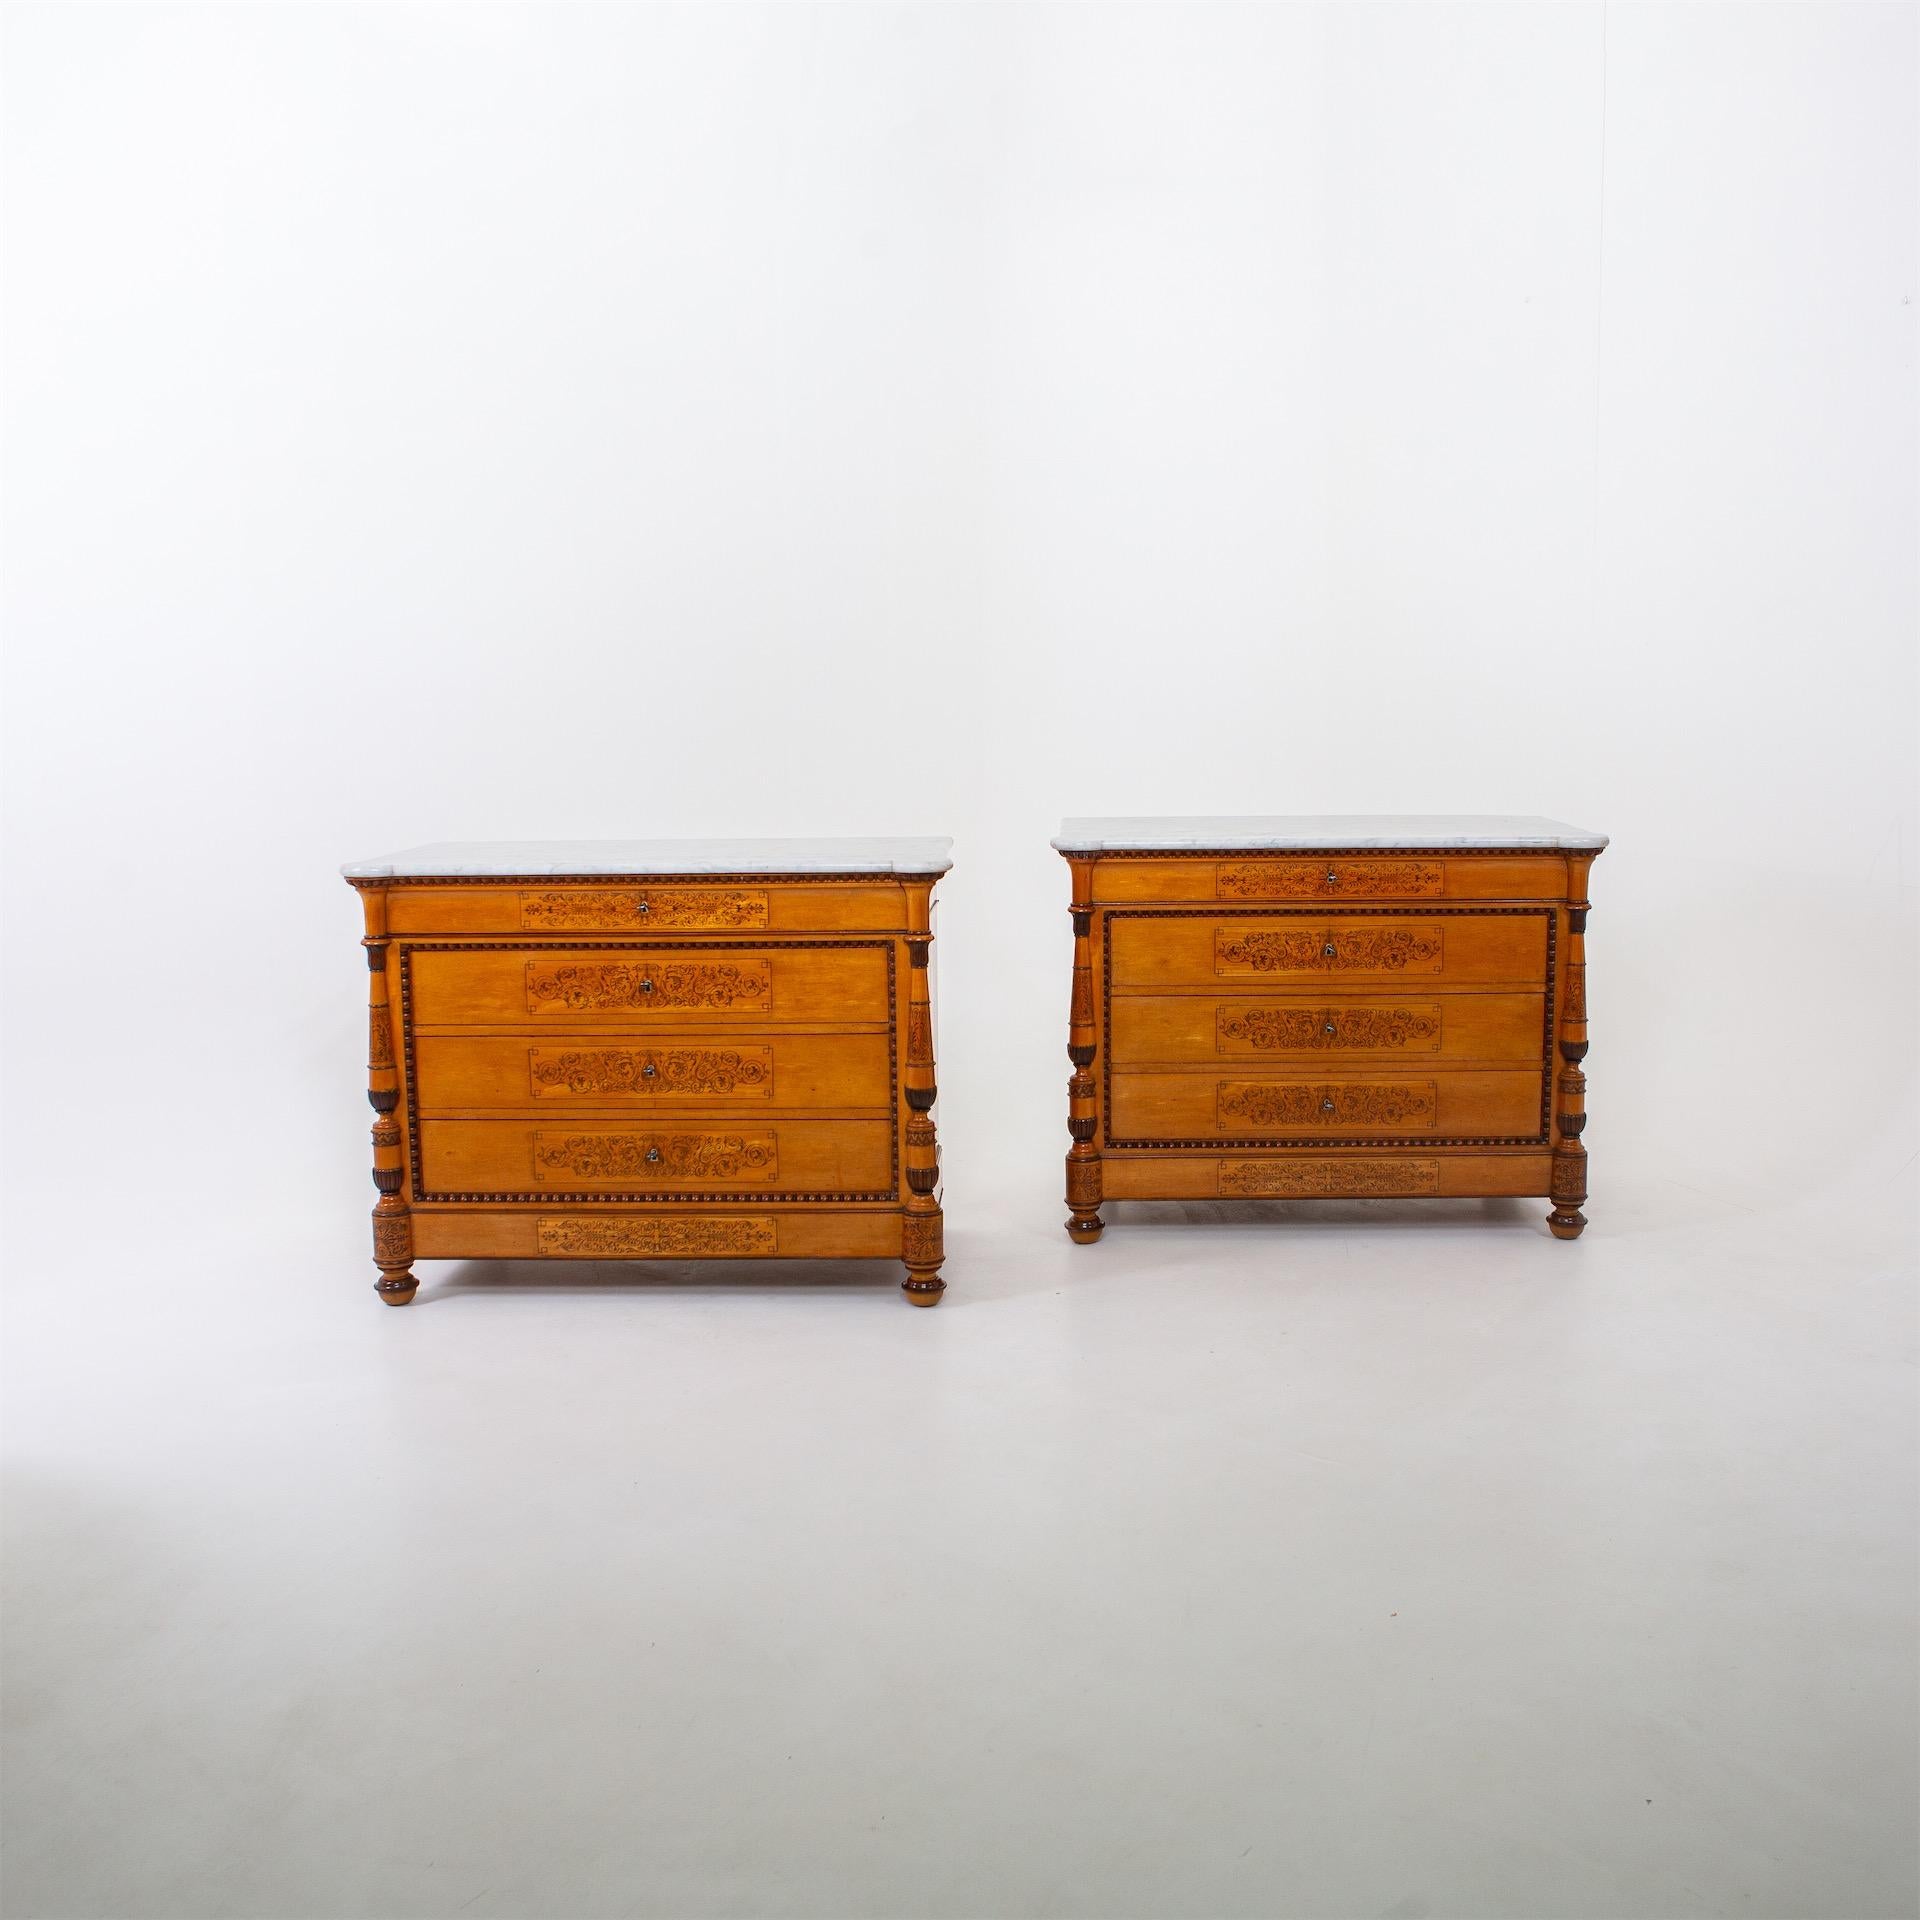 Pair of large Charles X chests of drawers with four drawers in maple and poplar, veneered and solid. The bodies with balustered columns at the corners stand on profiled ball feet and are covered with light grey marble slabs. The fronts are decorated